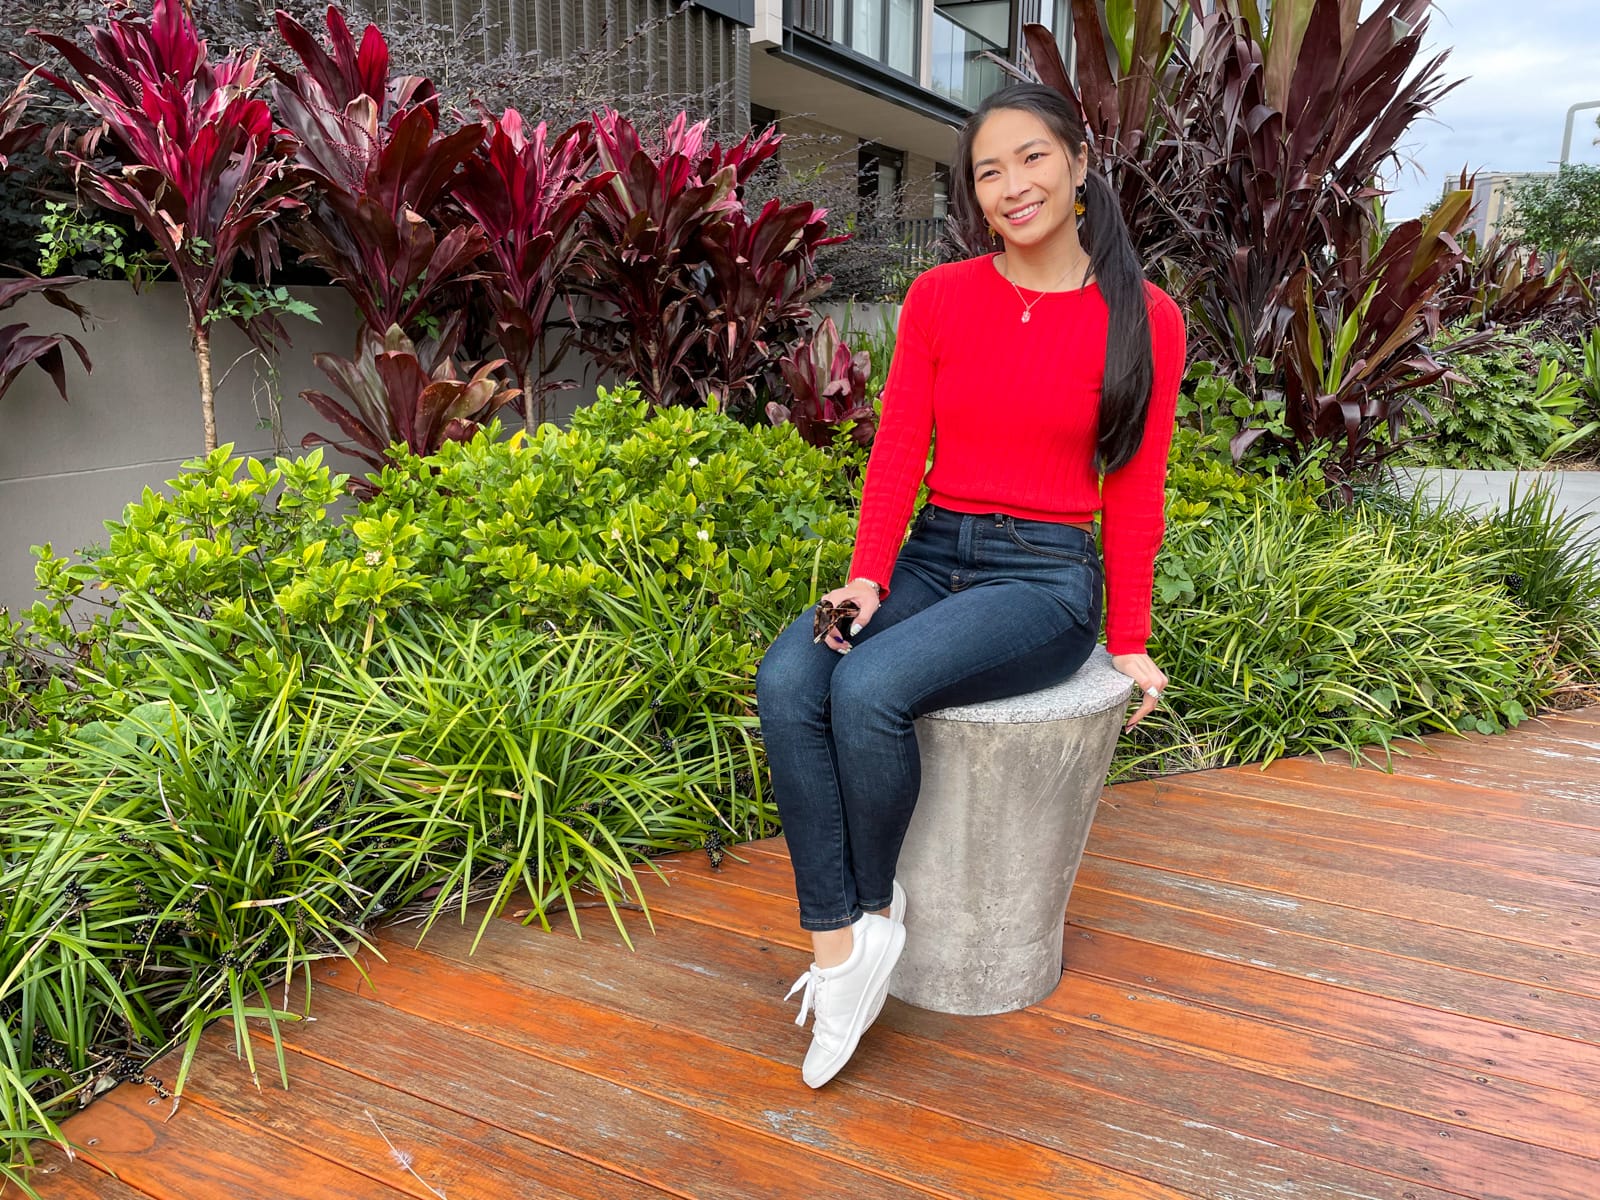 An Asian woman with long dark hair tied back in a low ponytail, sitting on a round concrete stool. She is wearing a red long-sleeved top and dark blue jeans, with white sneakers. Her ankles are crossed and she is holding a pair of sunglasses in her lap. There are bright green and red leafy plants in the background.